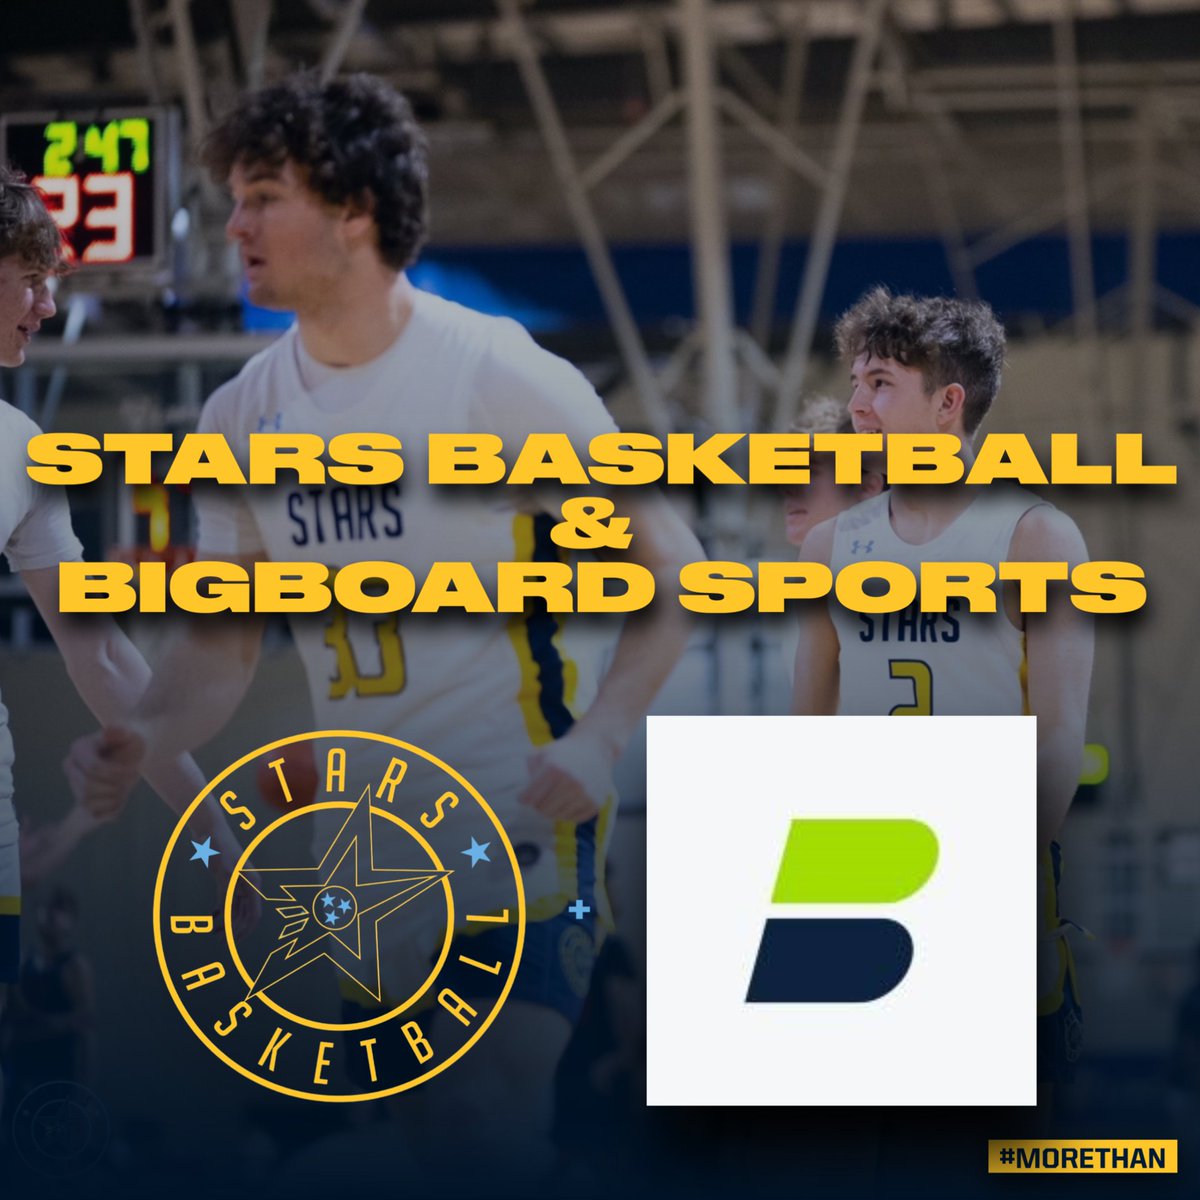 STARS Basketball Club is excited to announce a new partnership with BigBoard Sports (@BigBoardSports)  to be our official Athlete Recruiting Platform. 💪

See full announcement at bit.ly/bigboardsports

@StarsNash_GBB @StarsNash_MBB